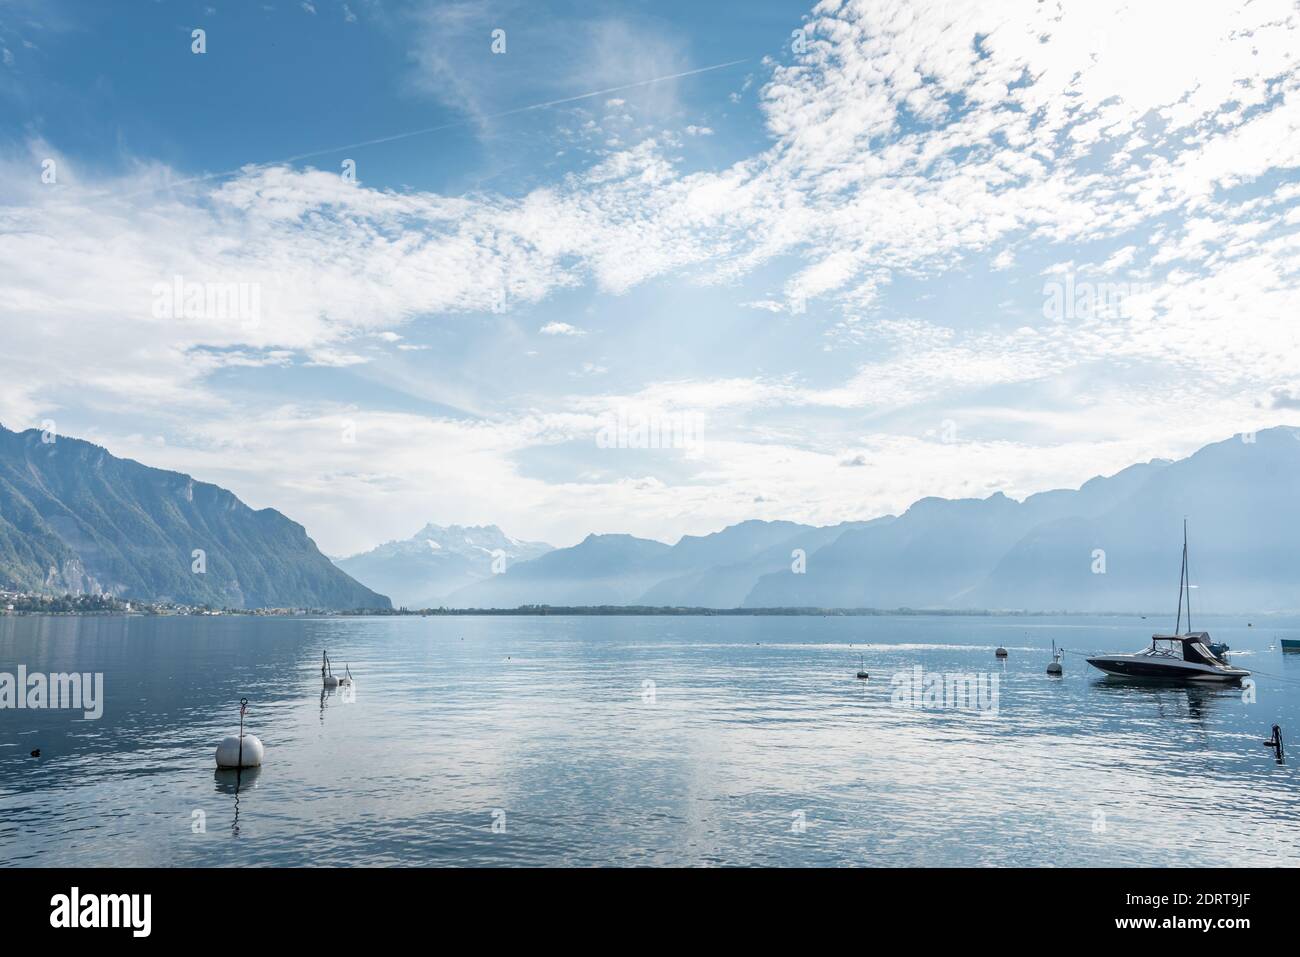 Alpine lake with calm water and with a boat moored and surrounded by snowy peaks Stock Photo